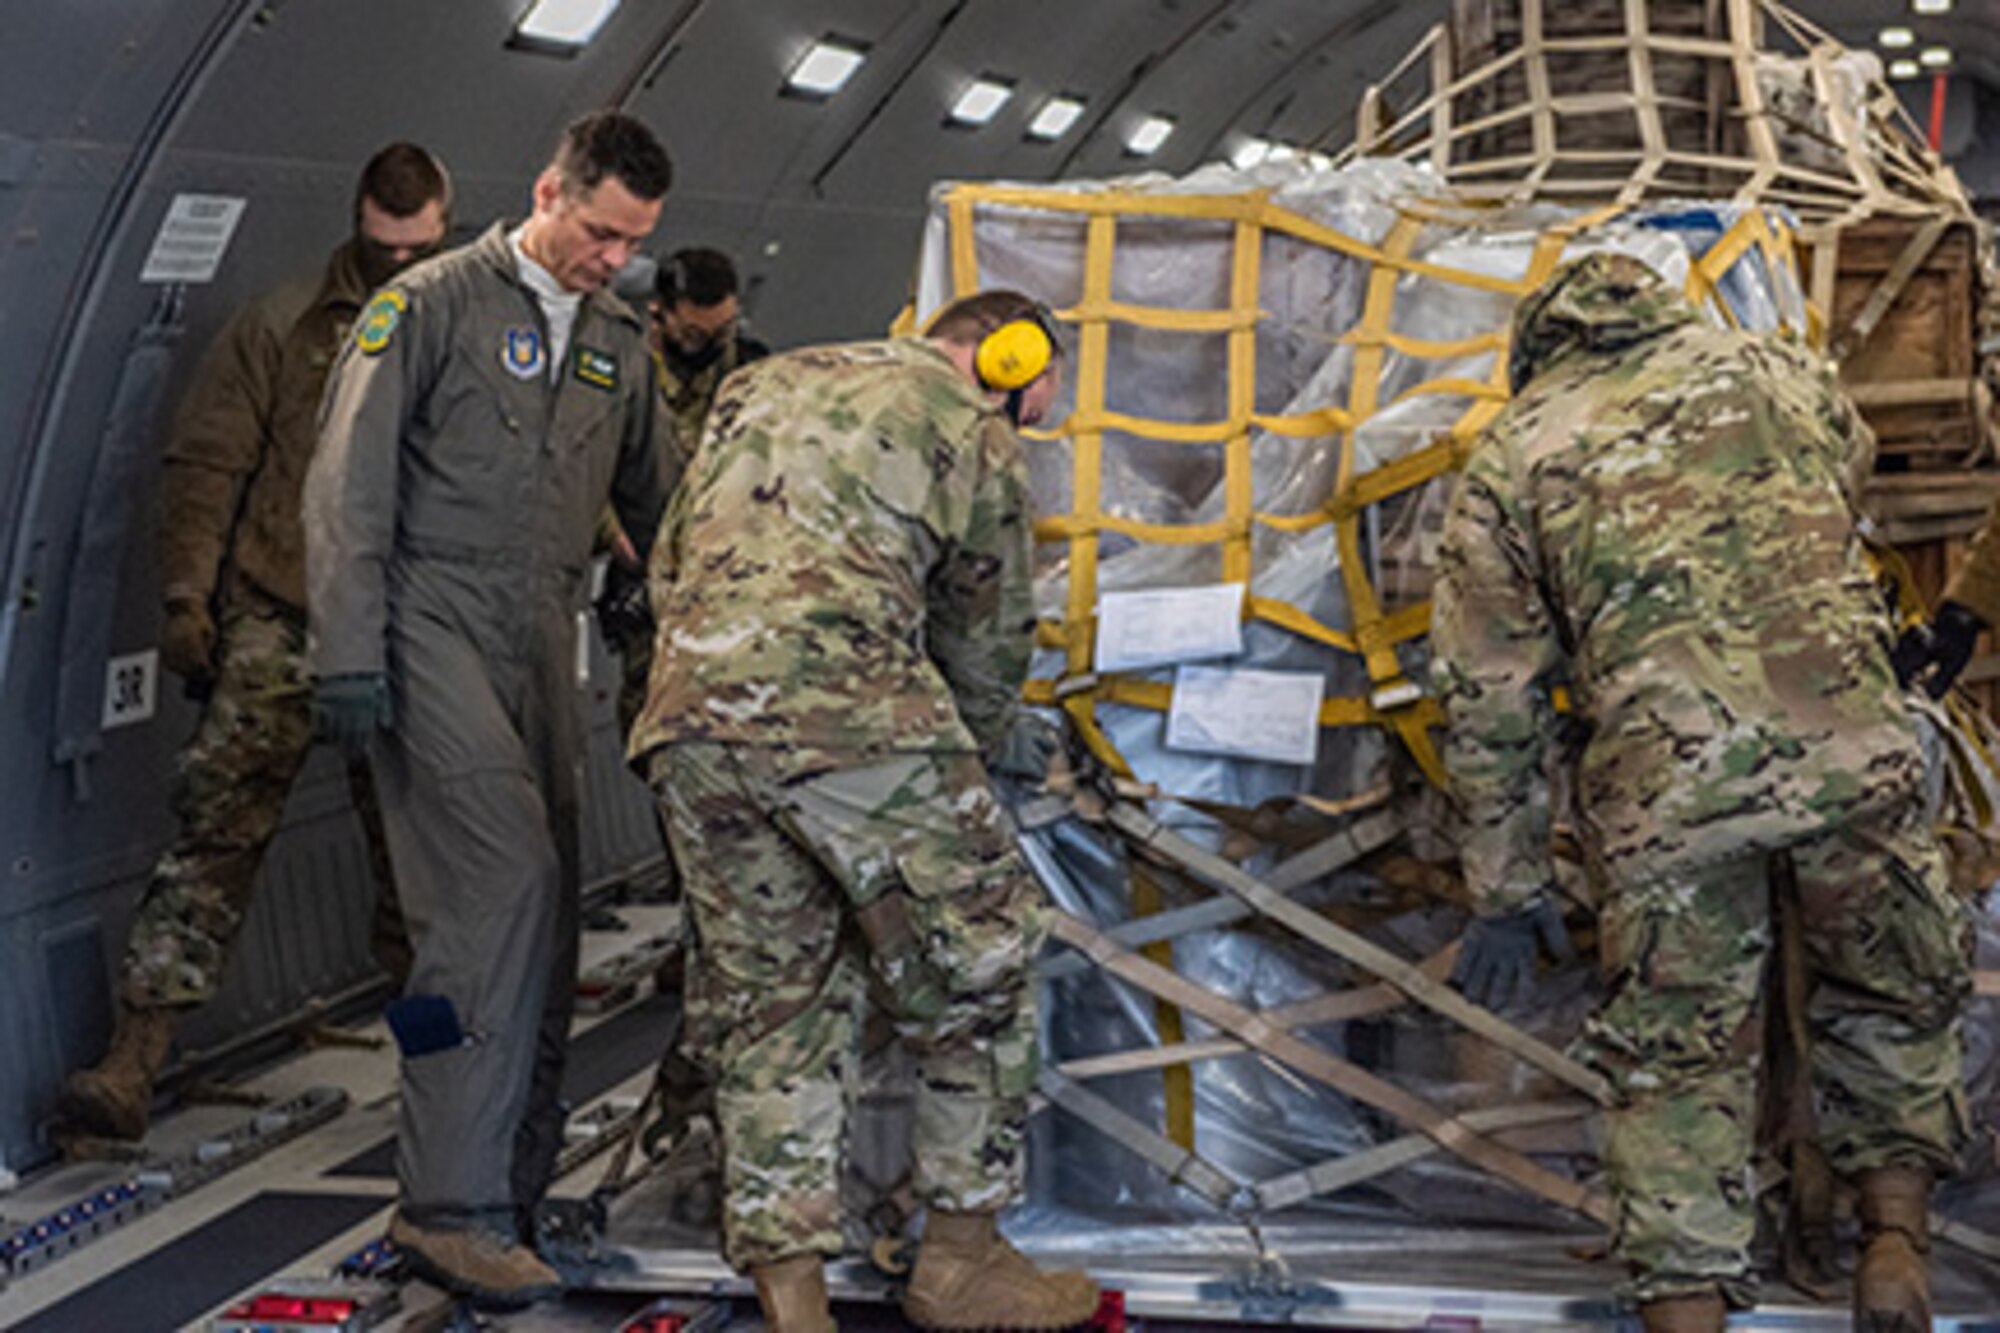 Tech. Sgt. Chris Davis, a boom operator from the 916th Air Refueling Wing, assists 67th Aerial Port Squadron reservists with locking a pallet down in a KC-46A Pegasus, Jan. 10, 2021, at Hill Air Force Base, Utah.